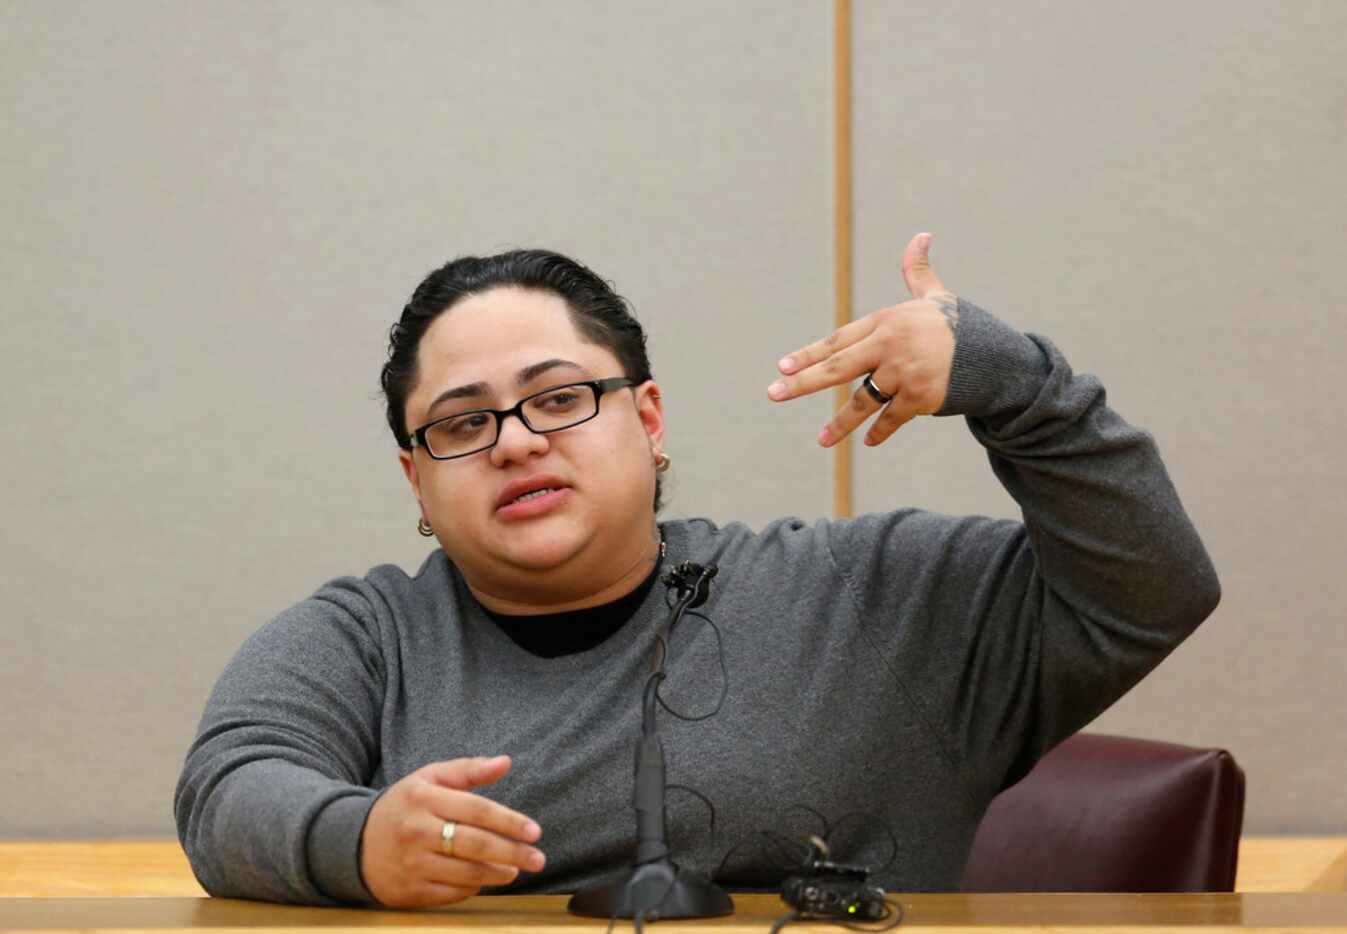 Monique Arredondo shows how Roy Oliver pointed a gun at her after a traffic accident two...